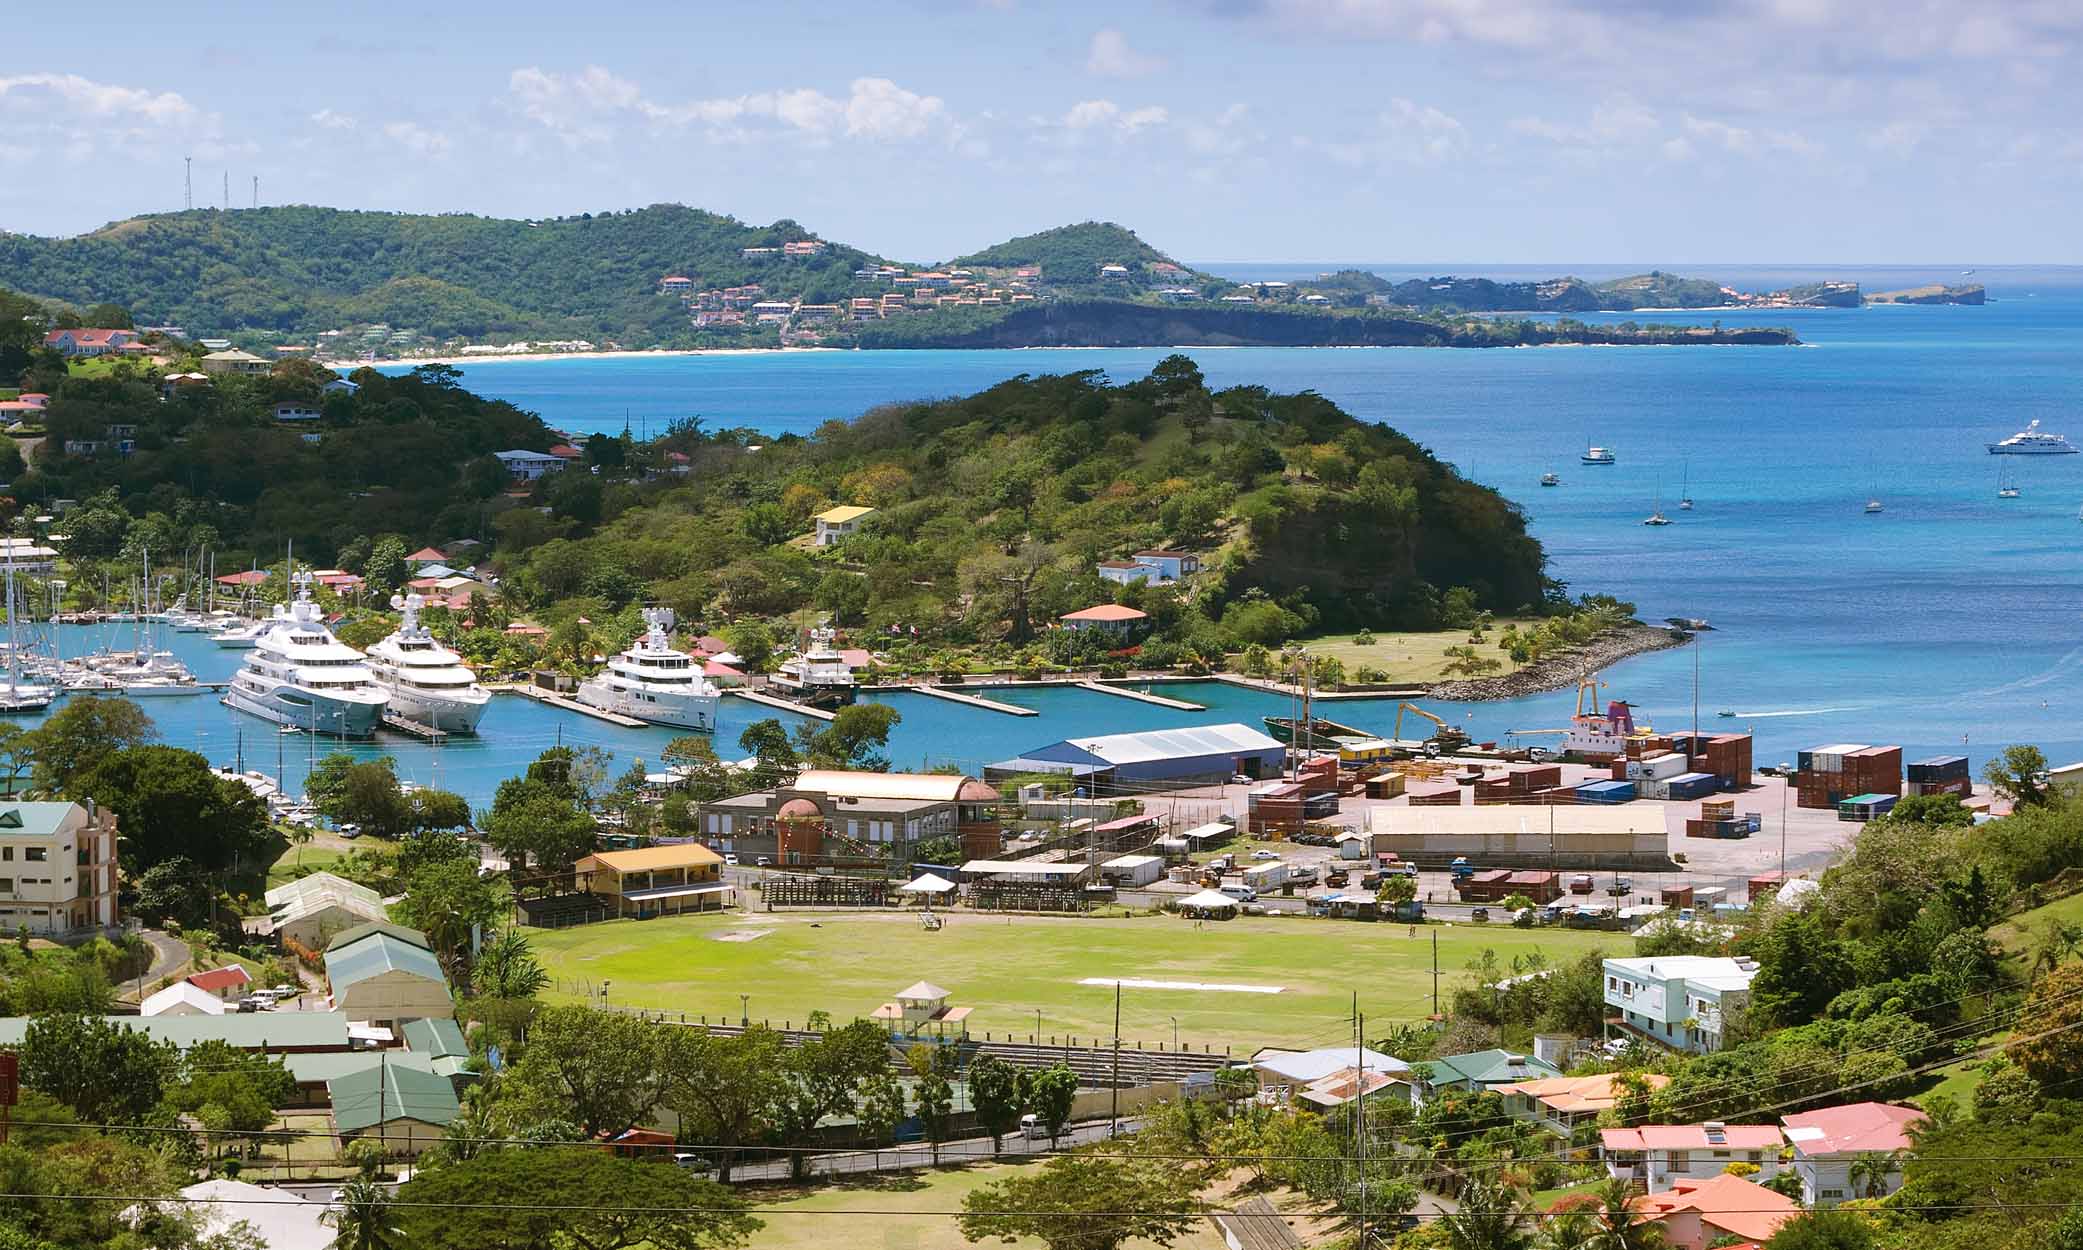 Grenada, the Spice Island, will satisfy all your senses.